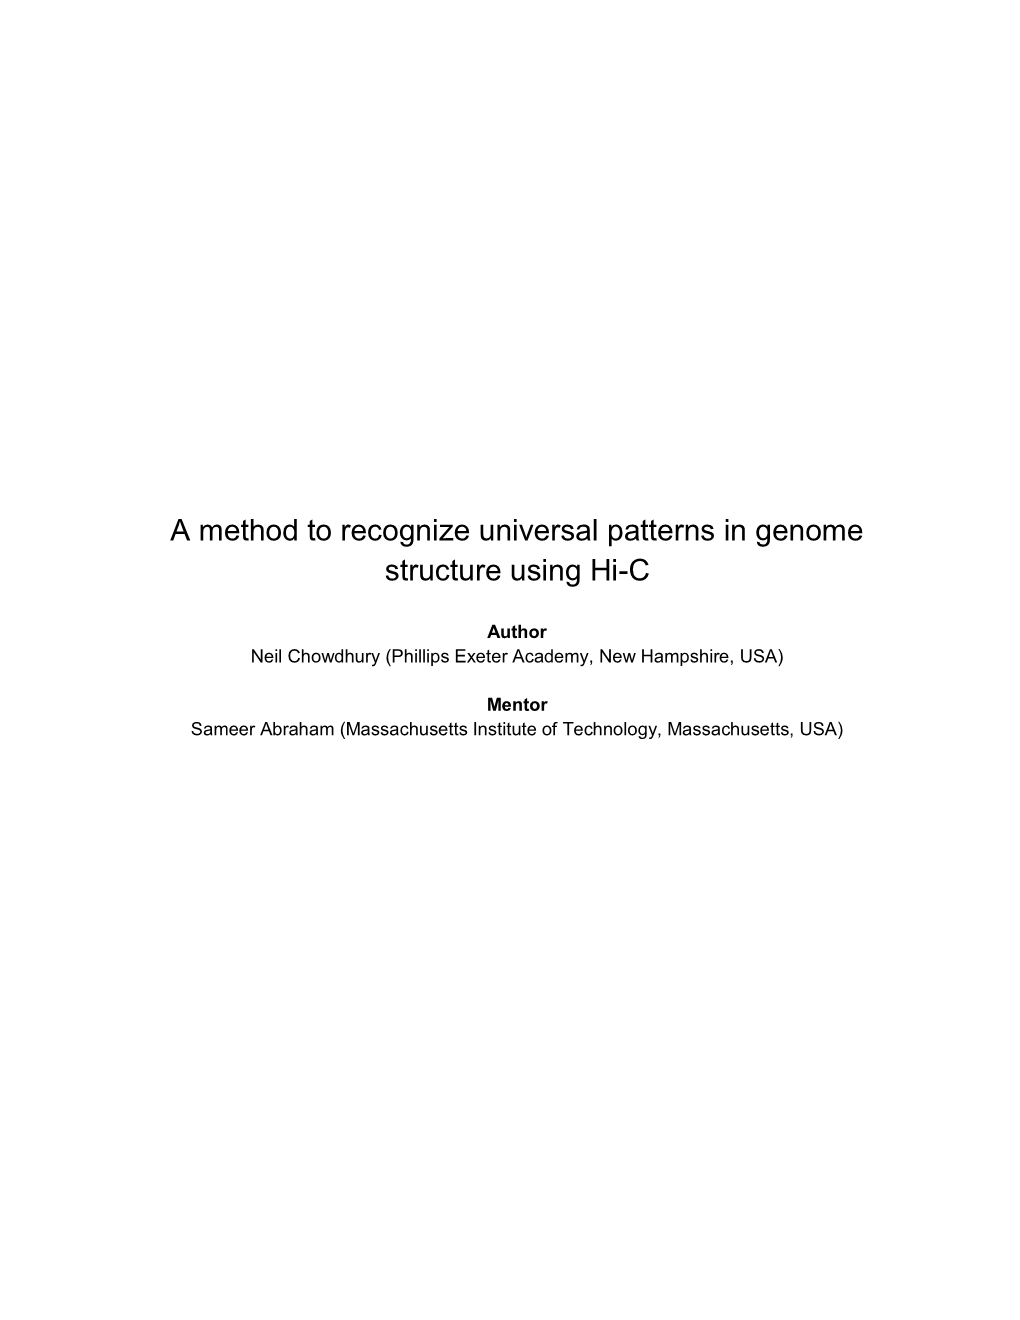 A Method to Recognize Universal Patterns in Genome Structure Using Hi-C